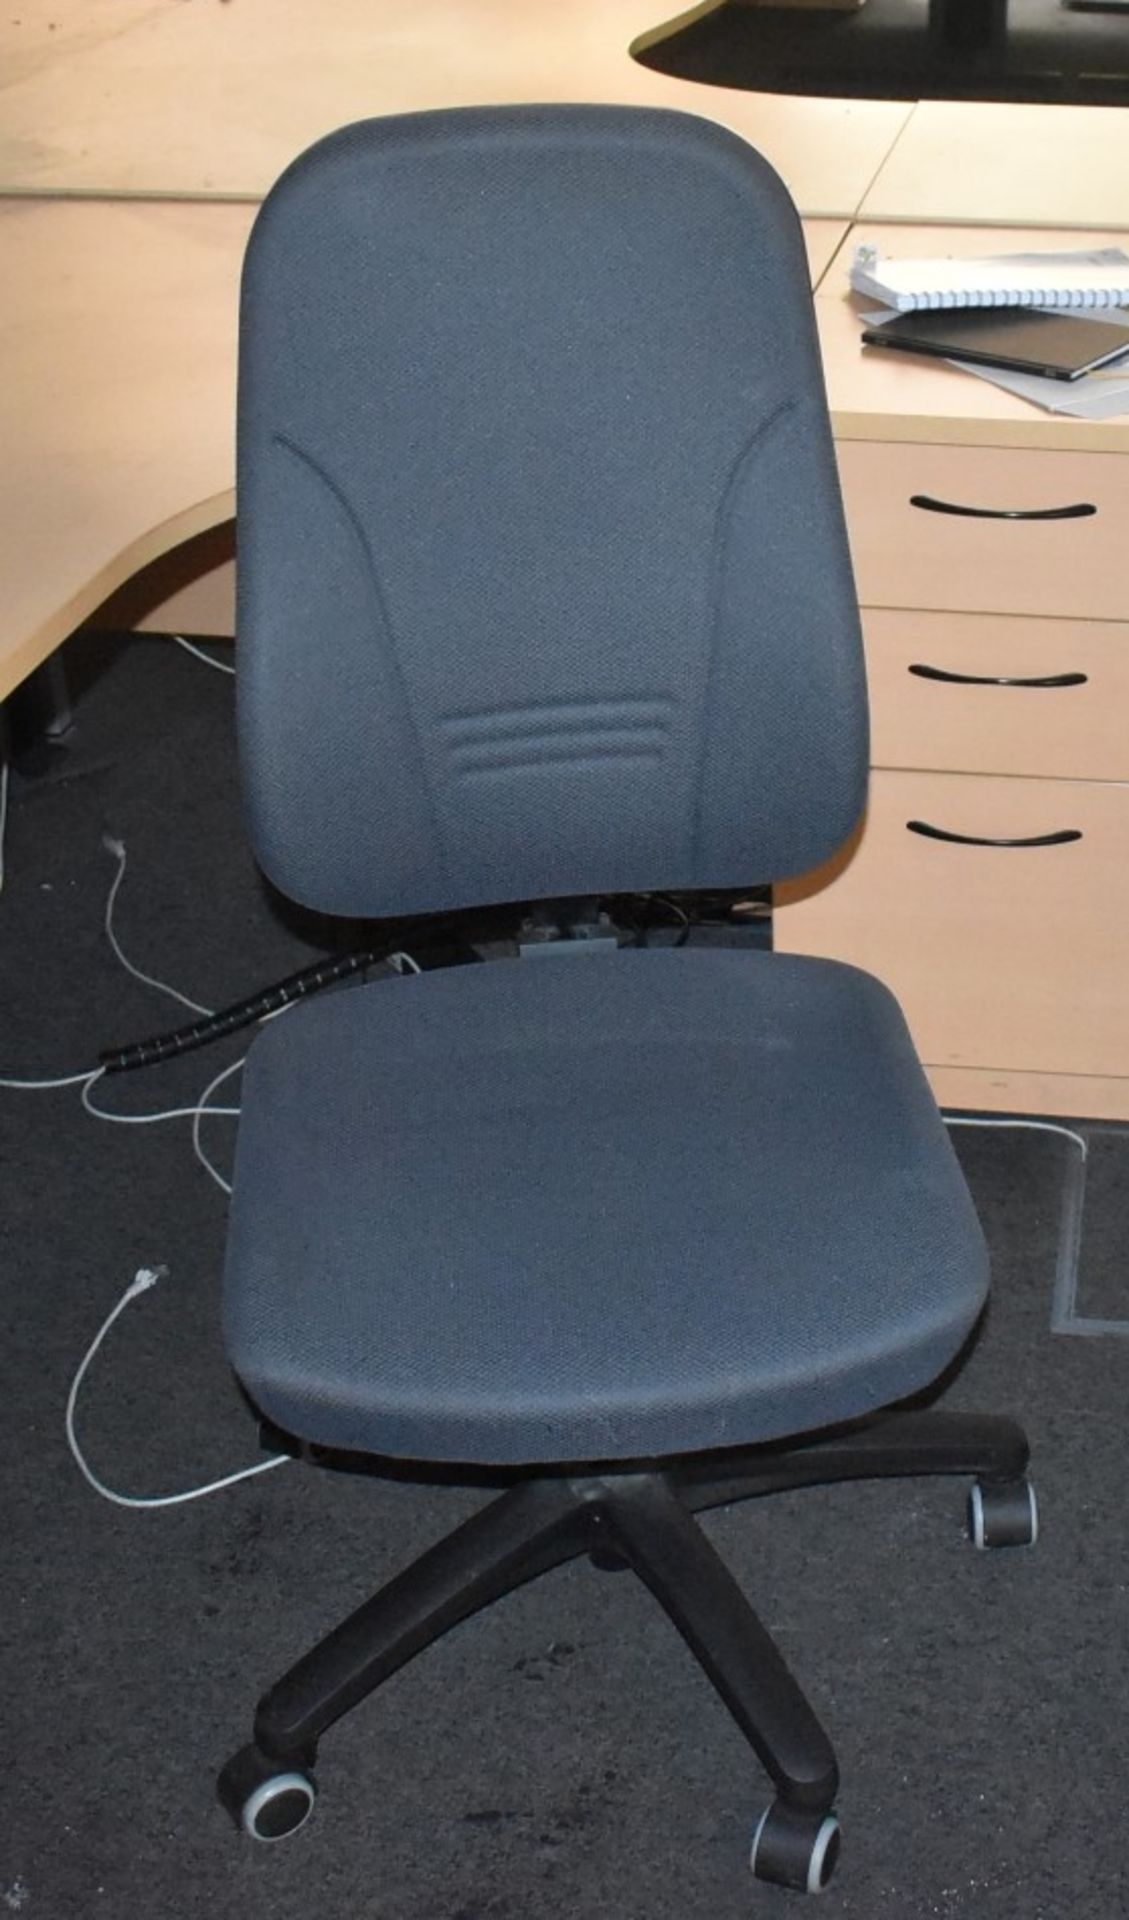 4 x Ergonomical Office Chairs in Grey - Gas Lift Height Adjustable - CL529 - Location: Wakefield - Image 5 of 6